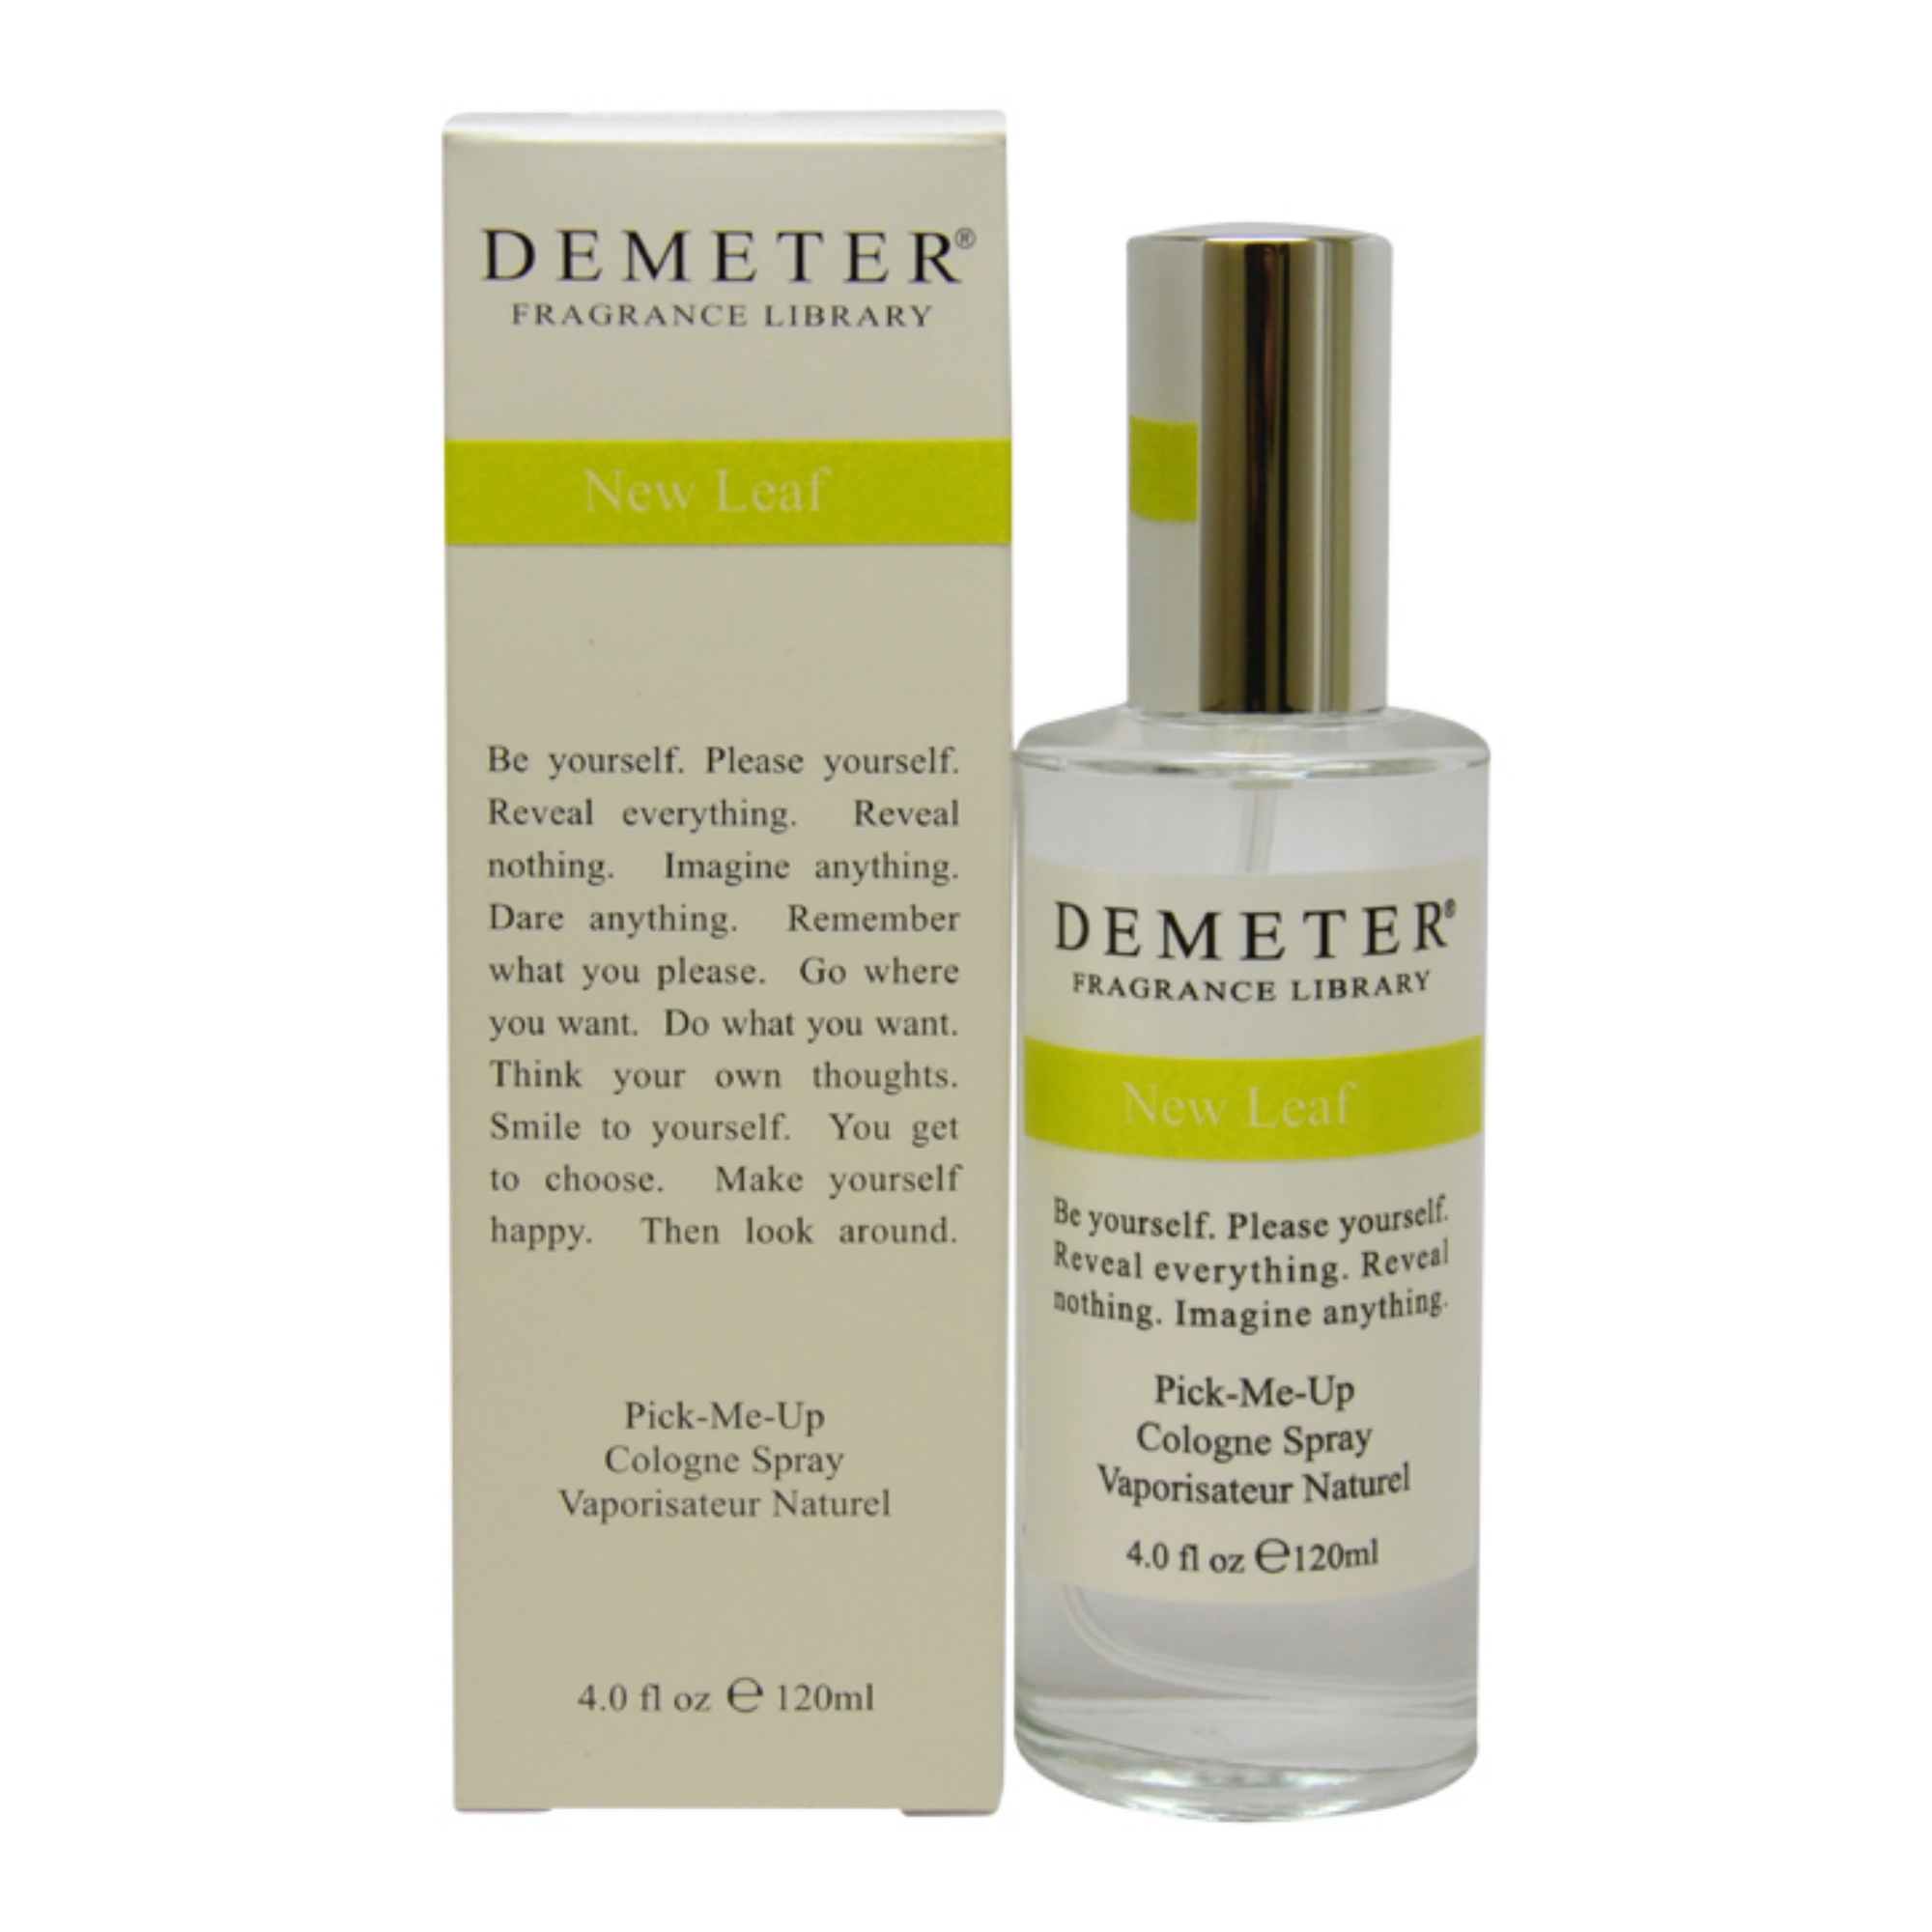 New Leaf by Demeter for Women - 4 oz Cologne Spray